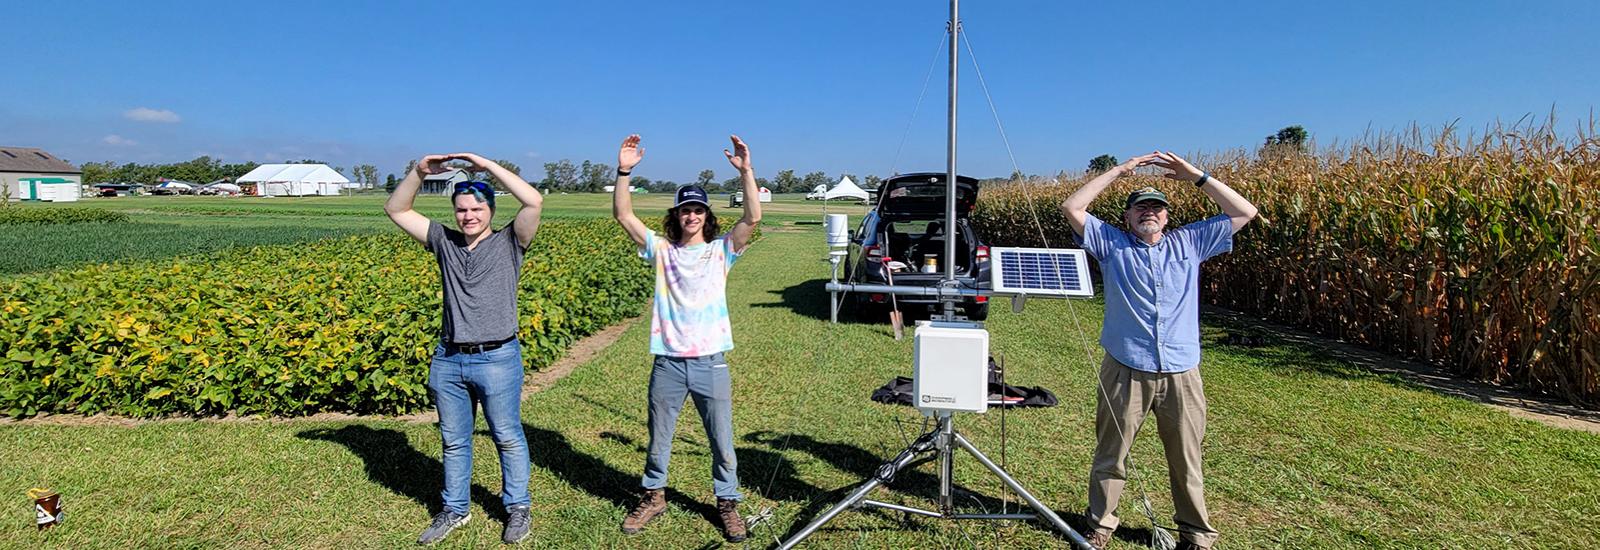 Jim DeGrand and students posing for O-H-I-O in front of a weather station